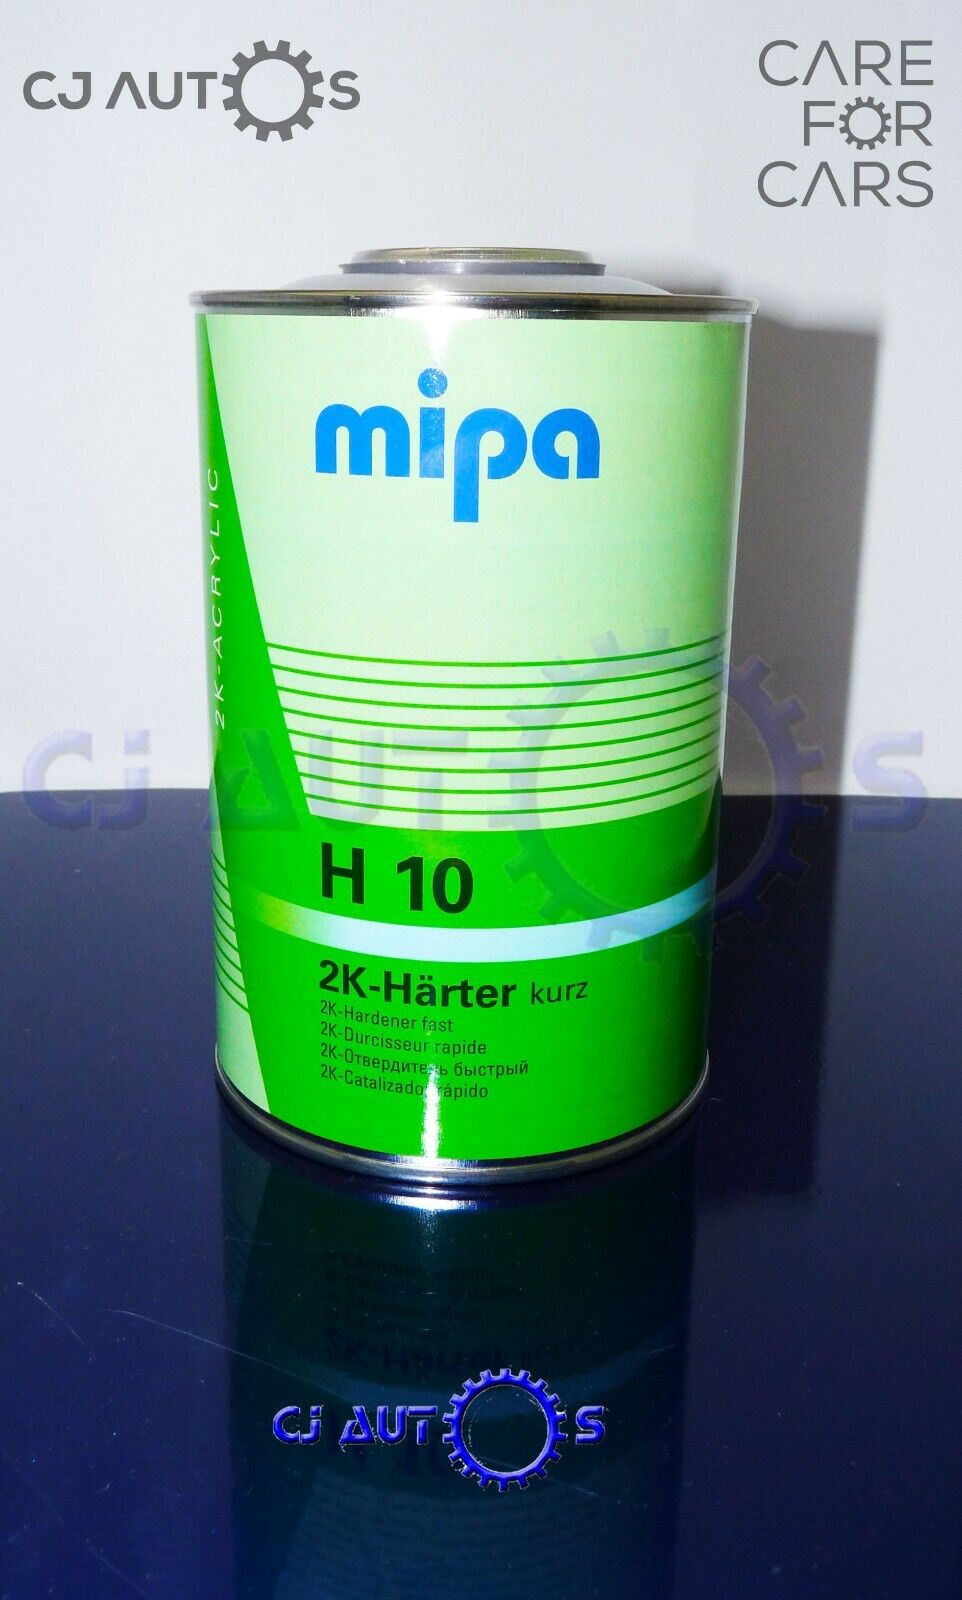 MIPA Max 40% OFF 2K ACRYLIC H10 FAST ACTIVATOR CATALYST PRIMER Beauty products PAINT HARDENER LACQUER 1Litre